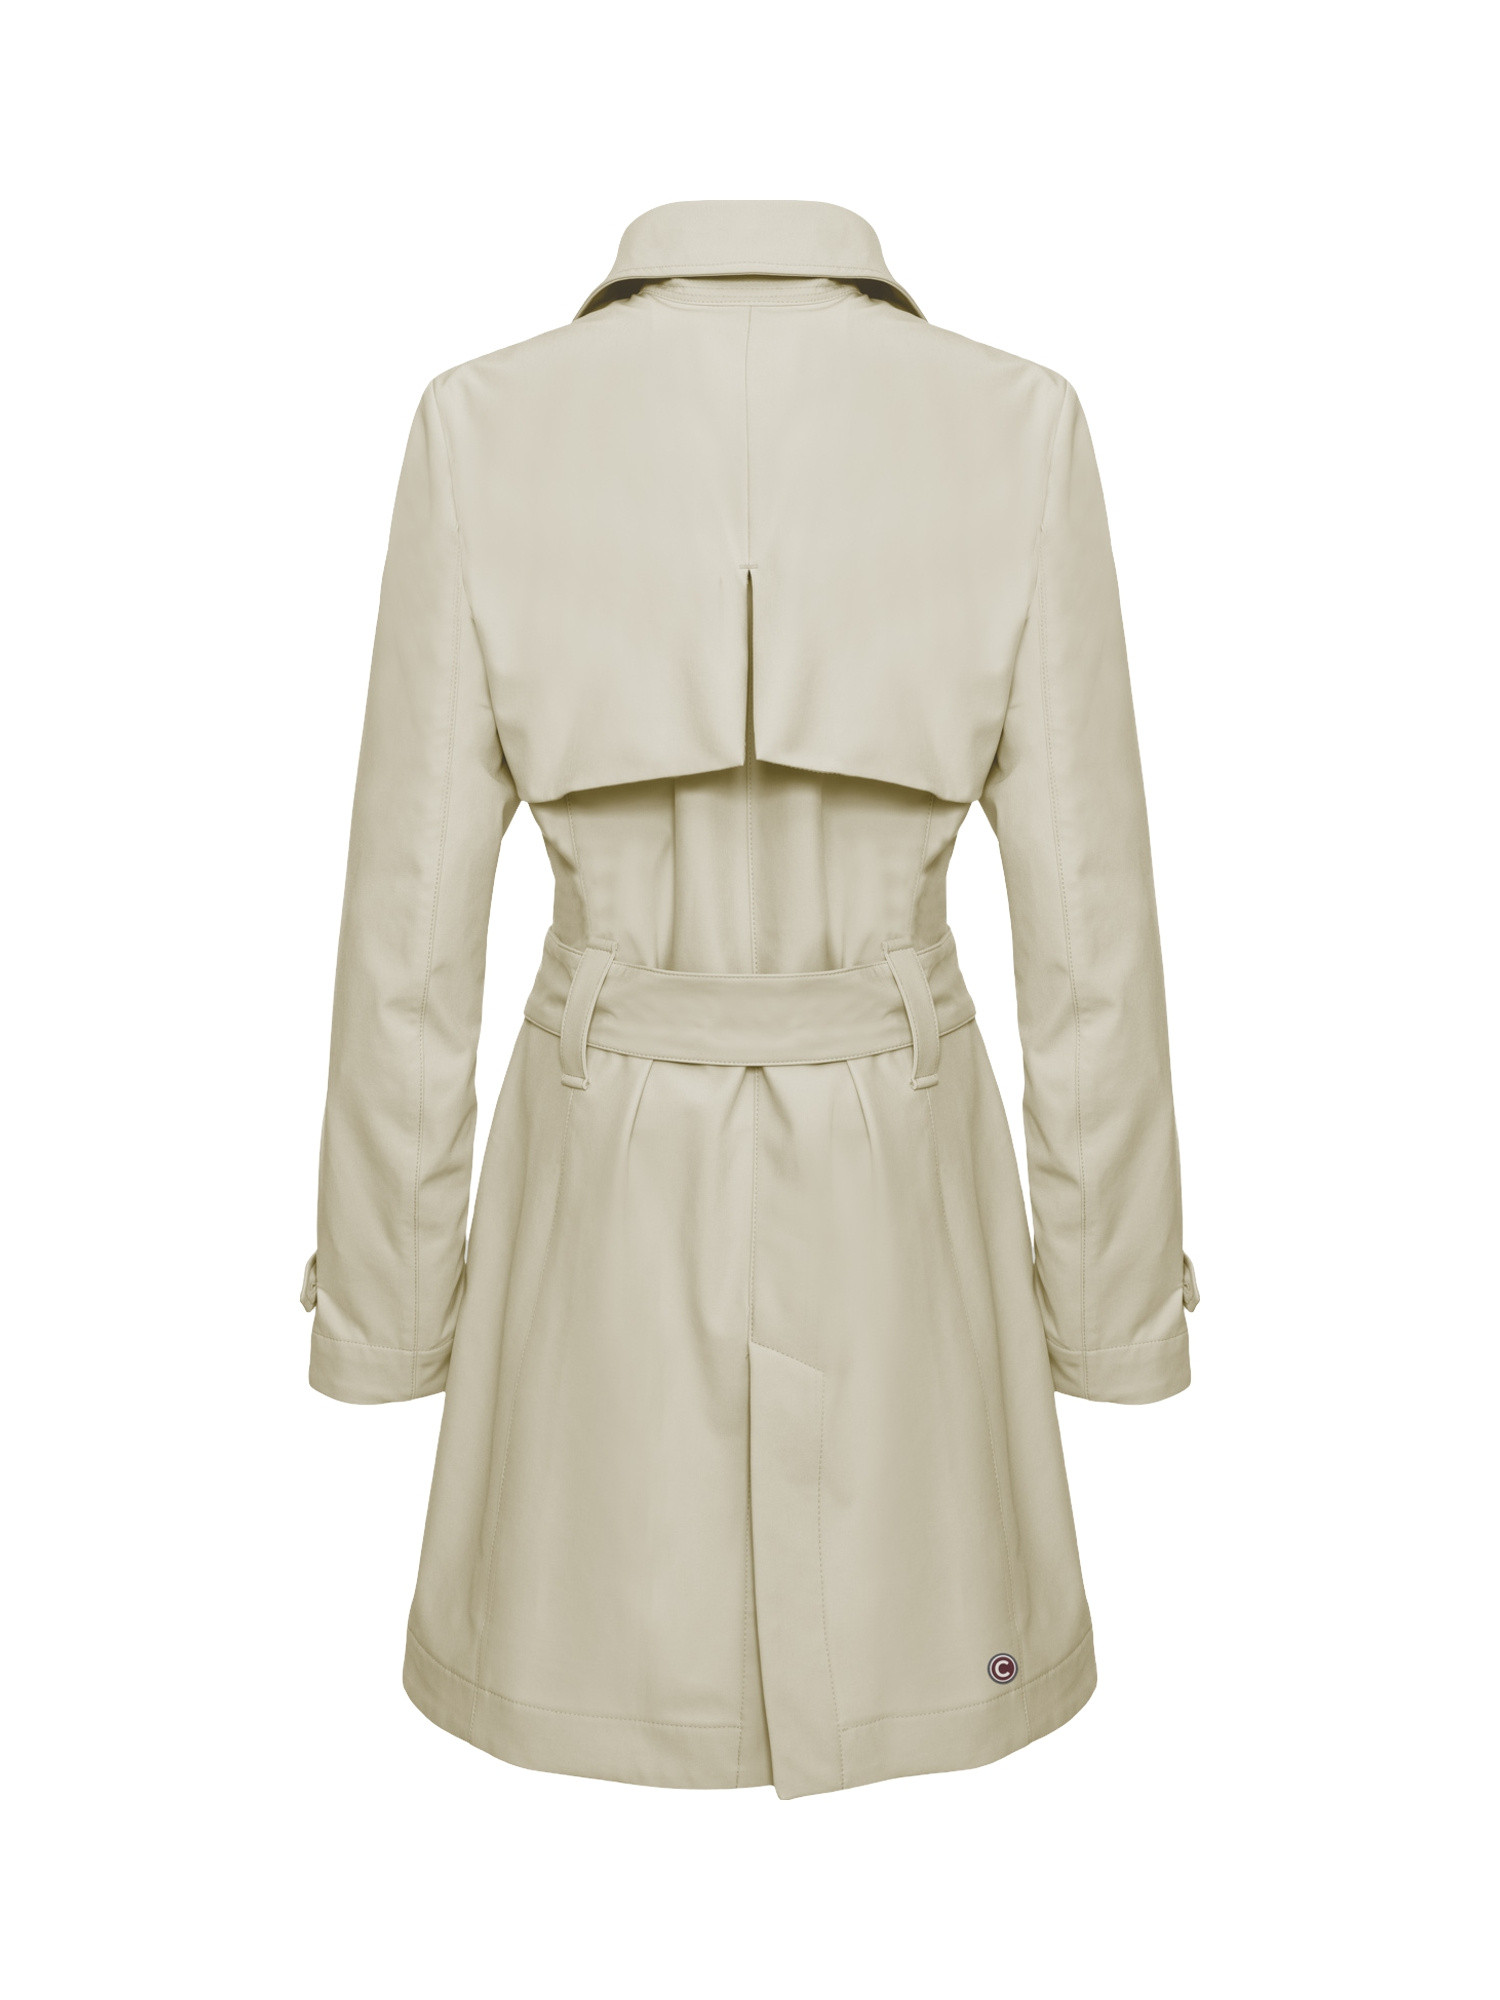 Colmar - Softshell trench jacket, White Cream, large image number 1